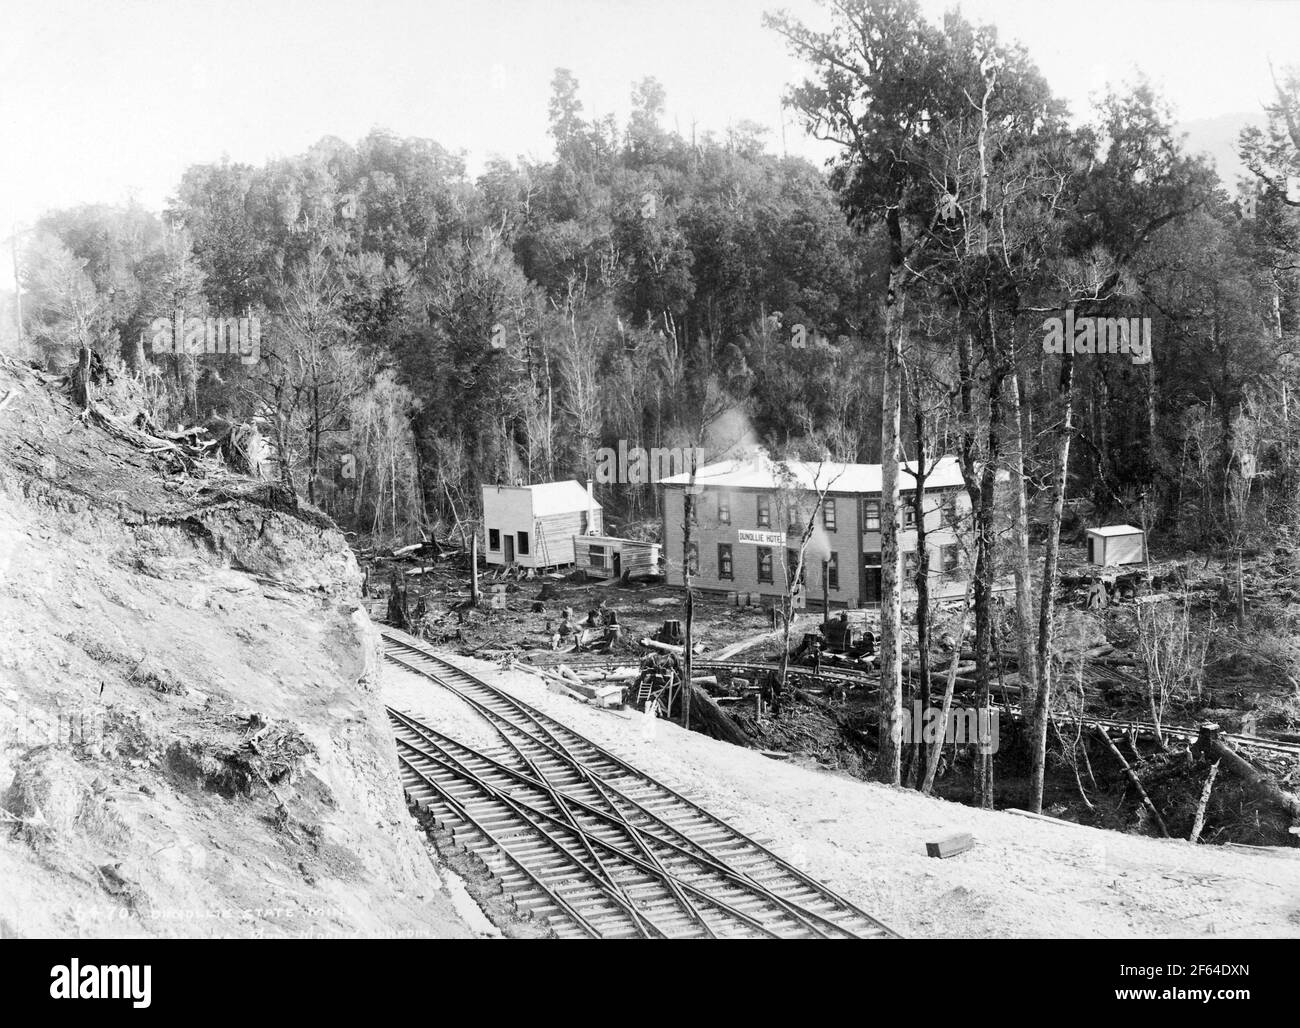 Hotel at Dunollie state coal mine, New Zealand, circa 1910. Photo by Muir Moodie of Dunedin Stock Photo